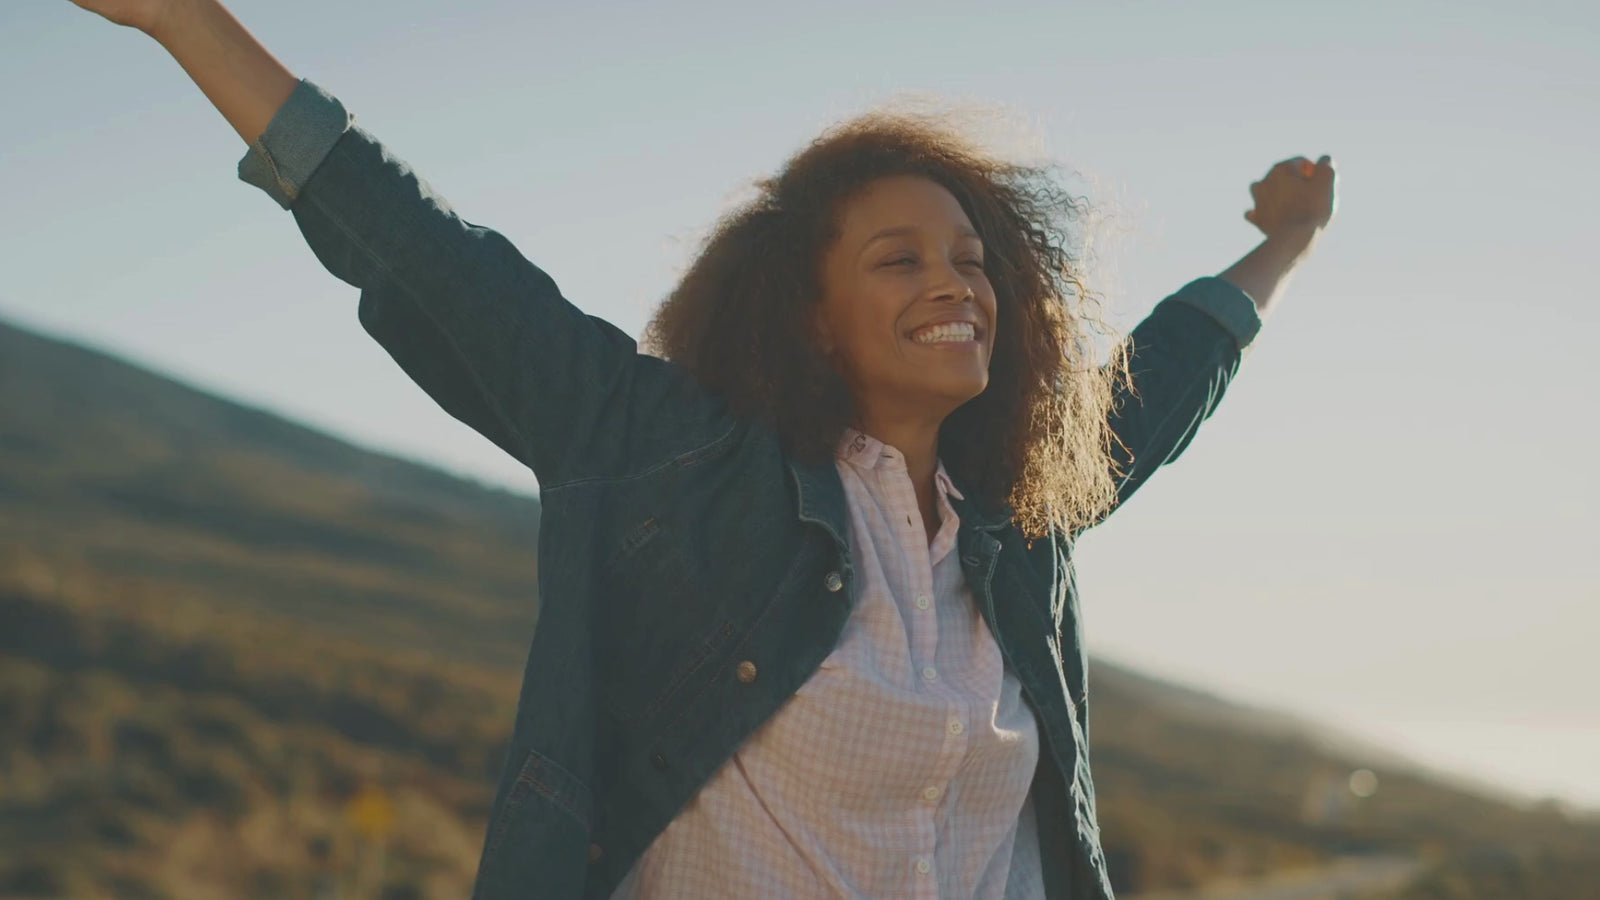 A joyful woman with curly hair, arms raised, wearing a denim jacket and a light checkered shirt, embodies the carefree spirit of the Women's Boutique.